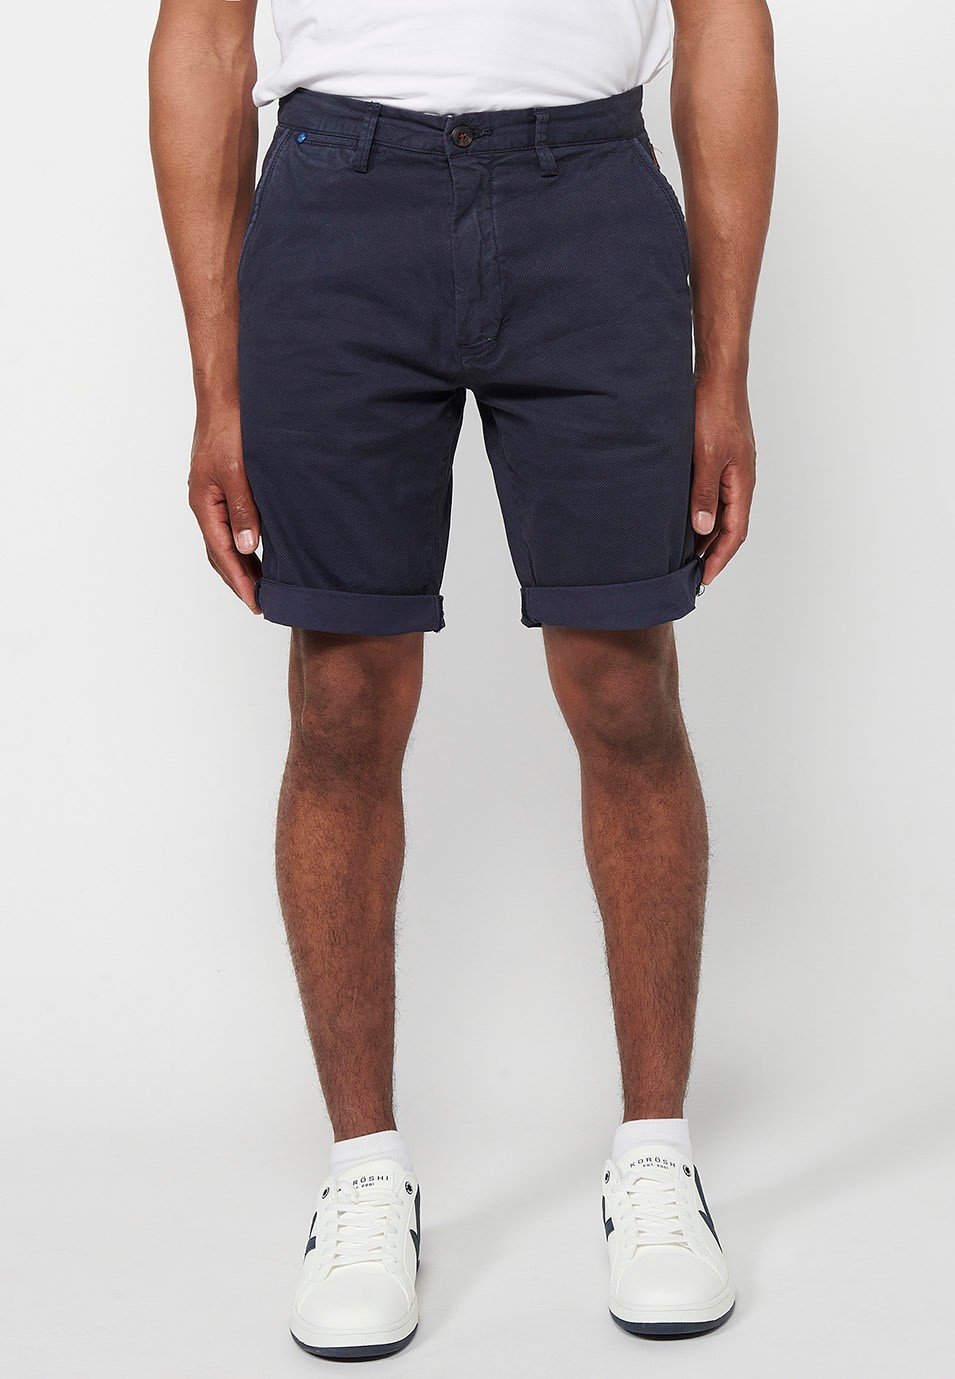 Bermuda Chino shorts with turn-up finish with front zipper and button closure with four pockets in Navy Color for Men 1